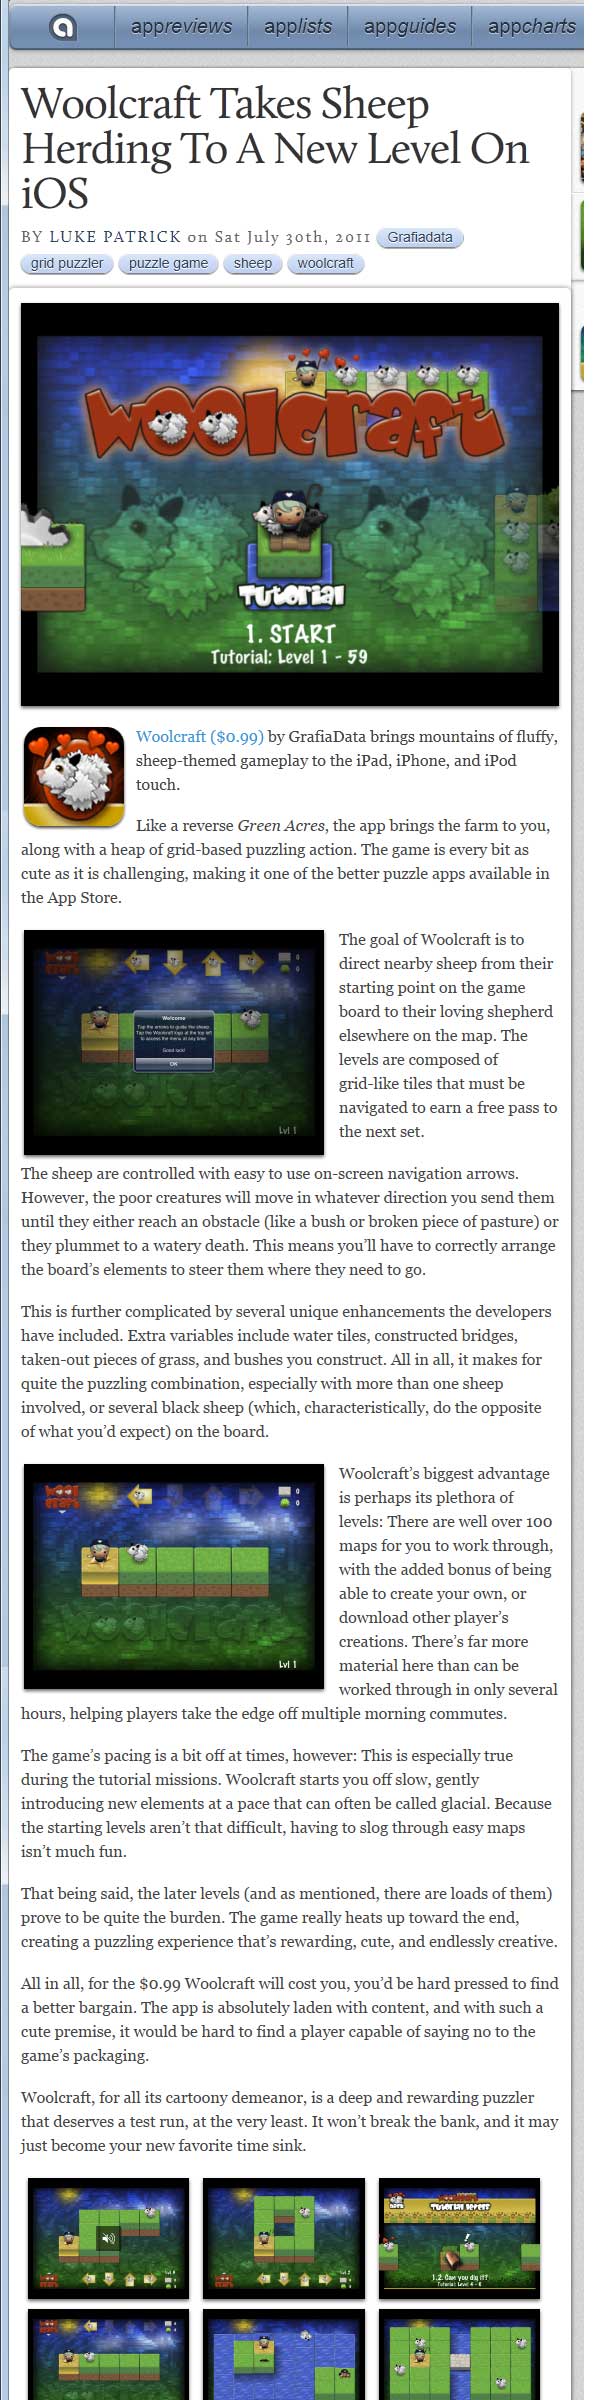 appadvice review Woolcraft